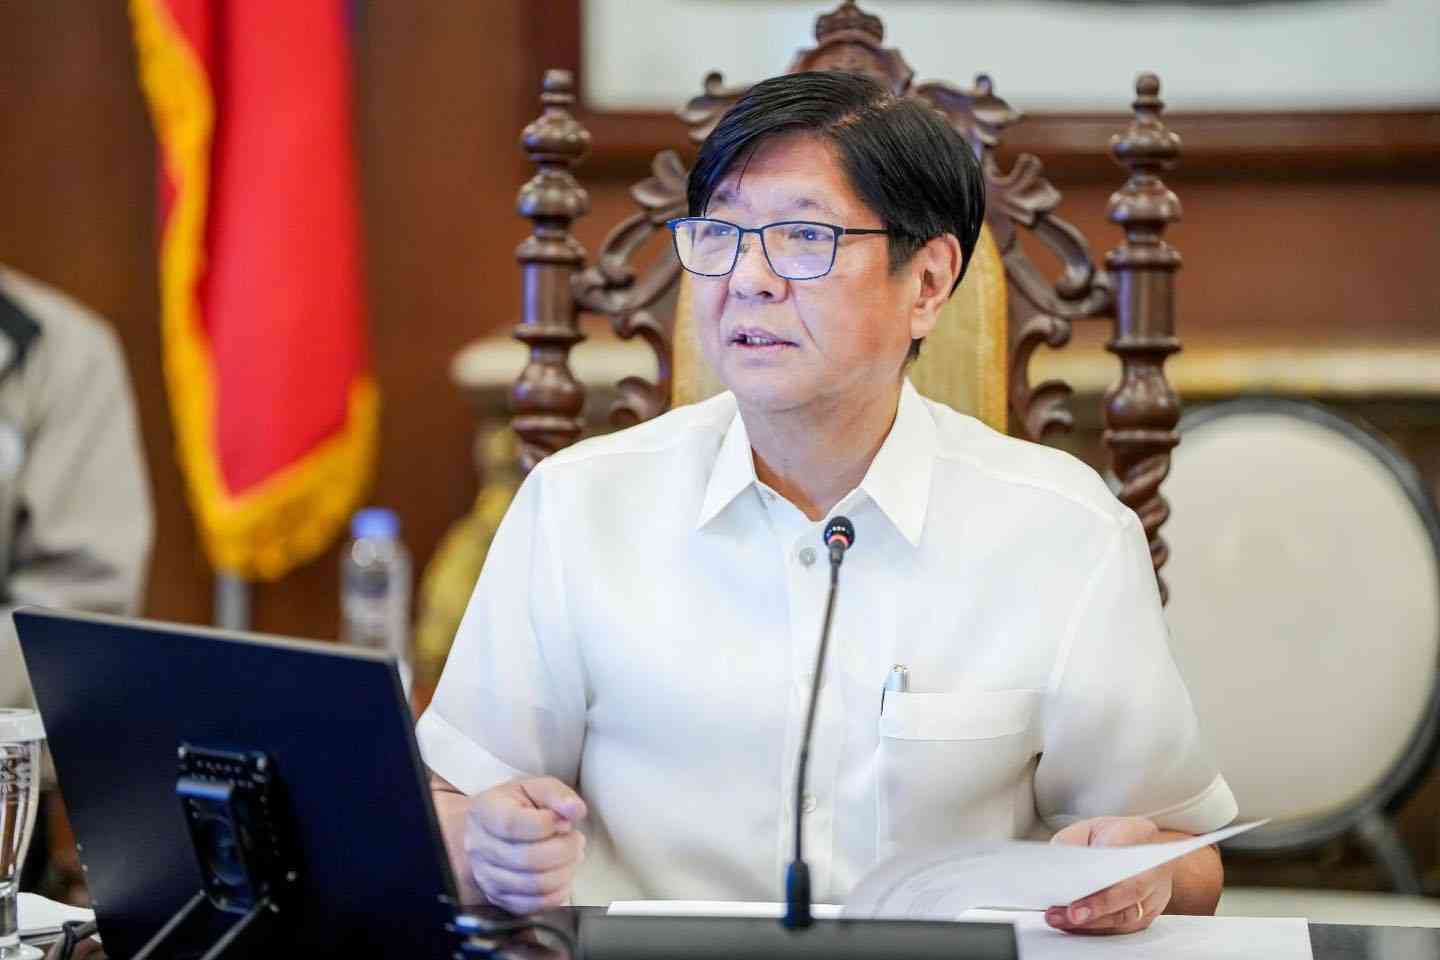 Marcos on Lunar New Year: Rekindle enthusiasm, optimism on Chinese New Year